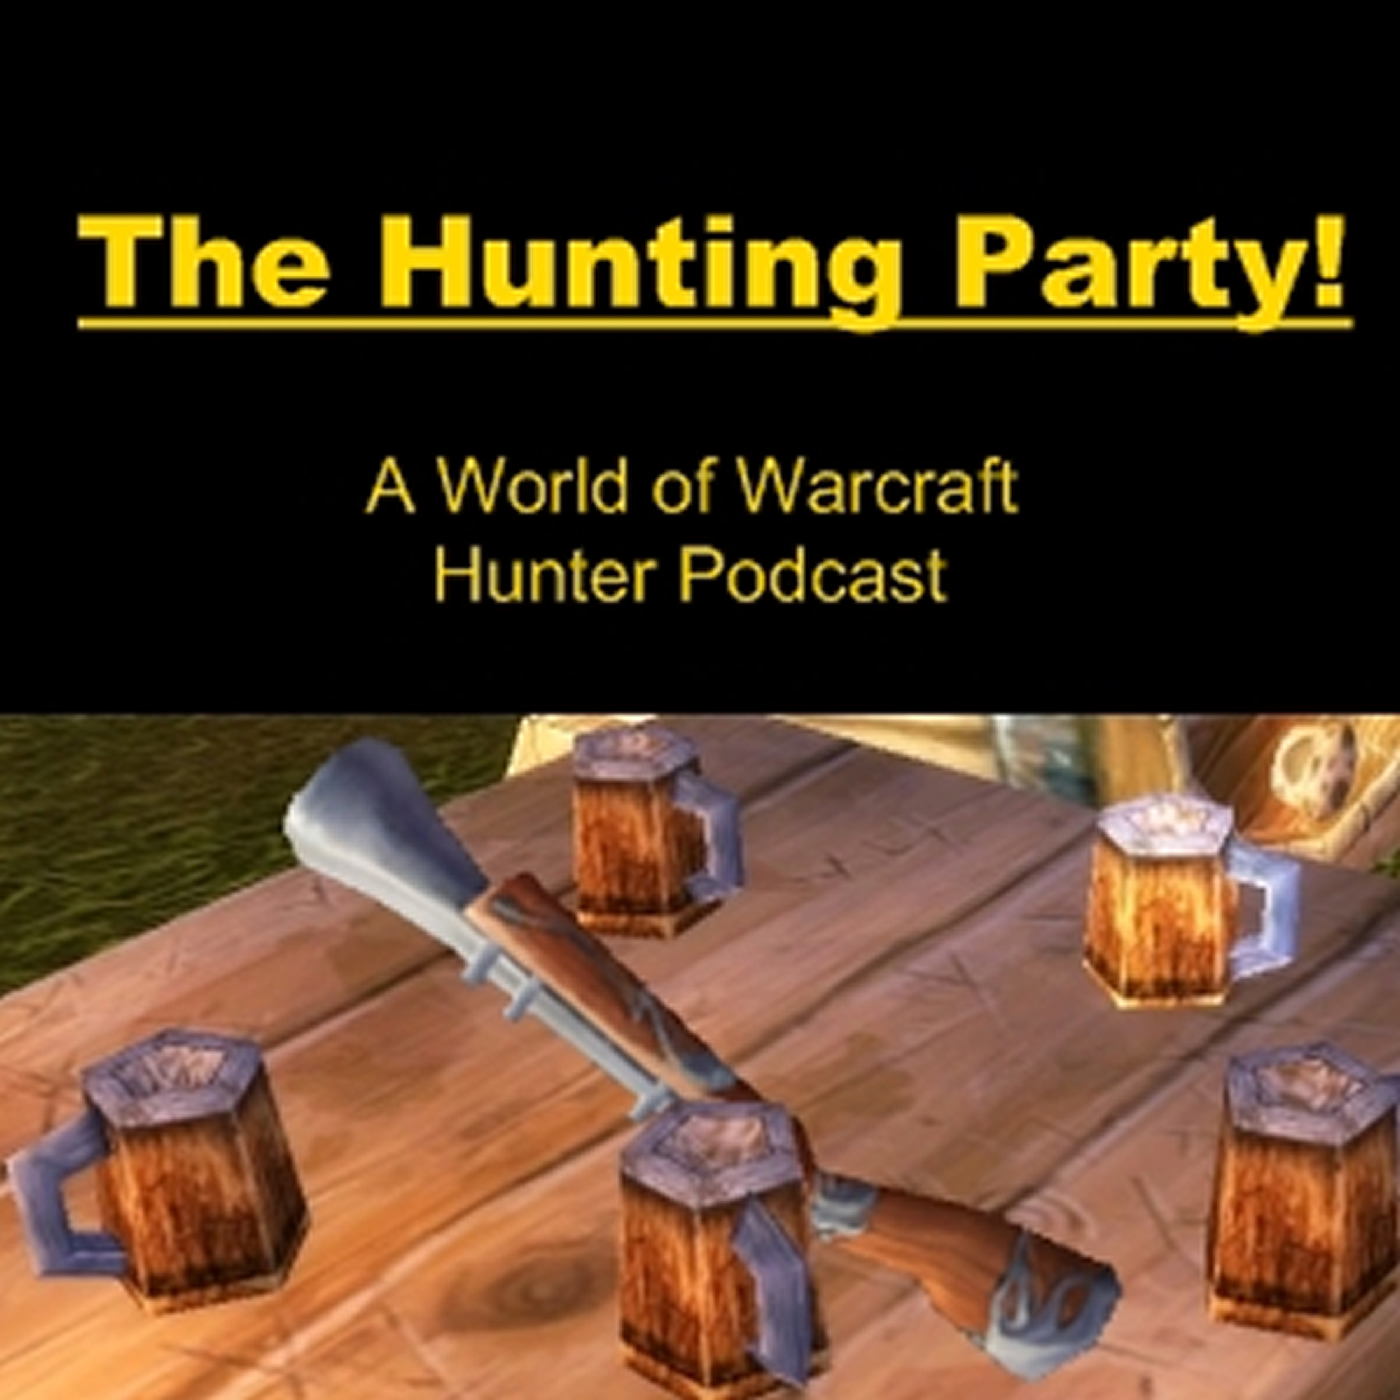 The Hunting Party Podcast Returns